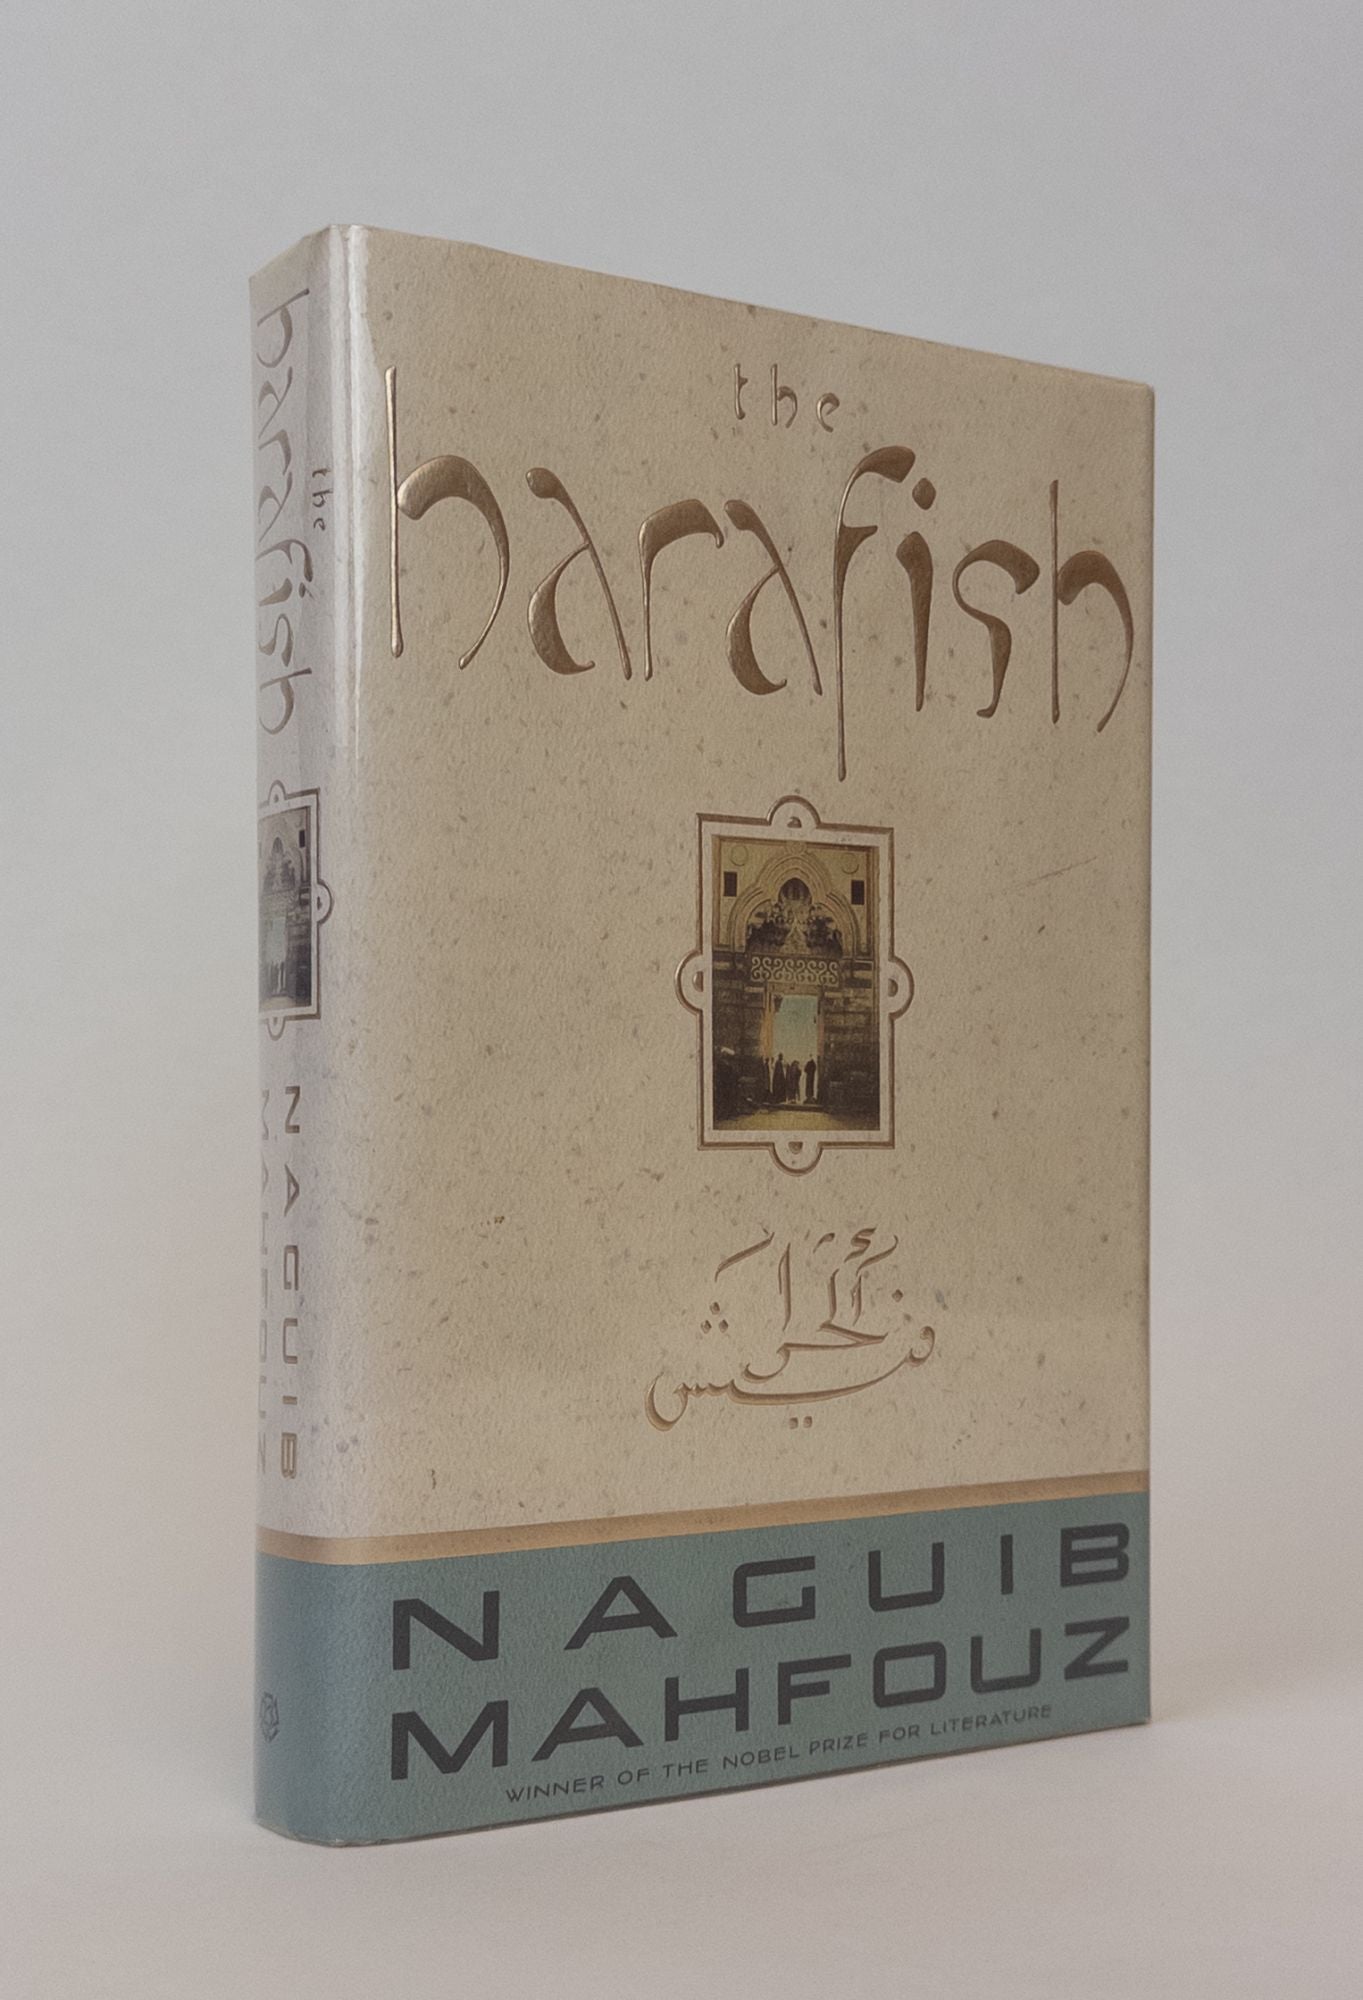 Product Image for THE HARAFISH [Signed]